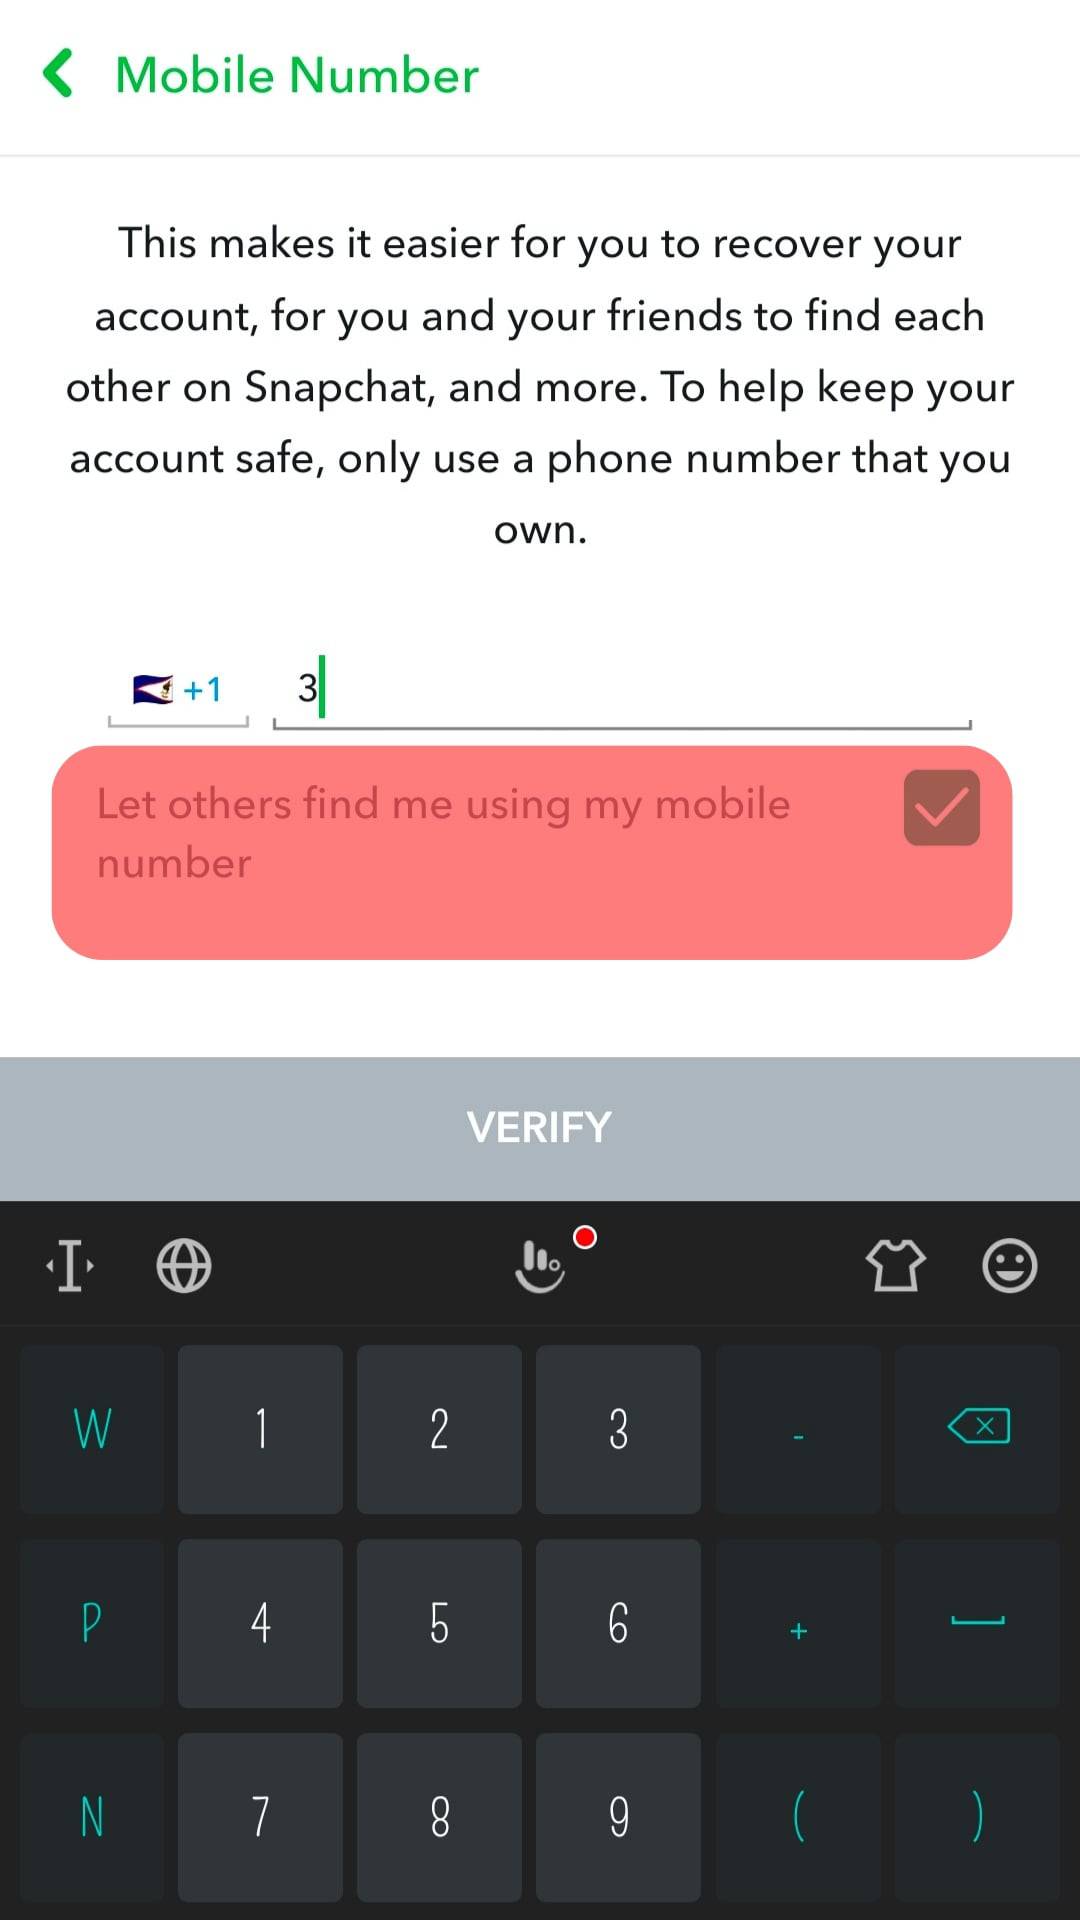 Turn Off The Let Others Find Me Using My Mobile Number Option.